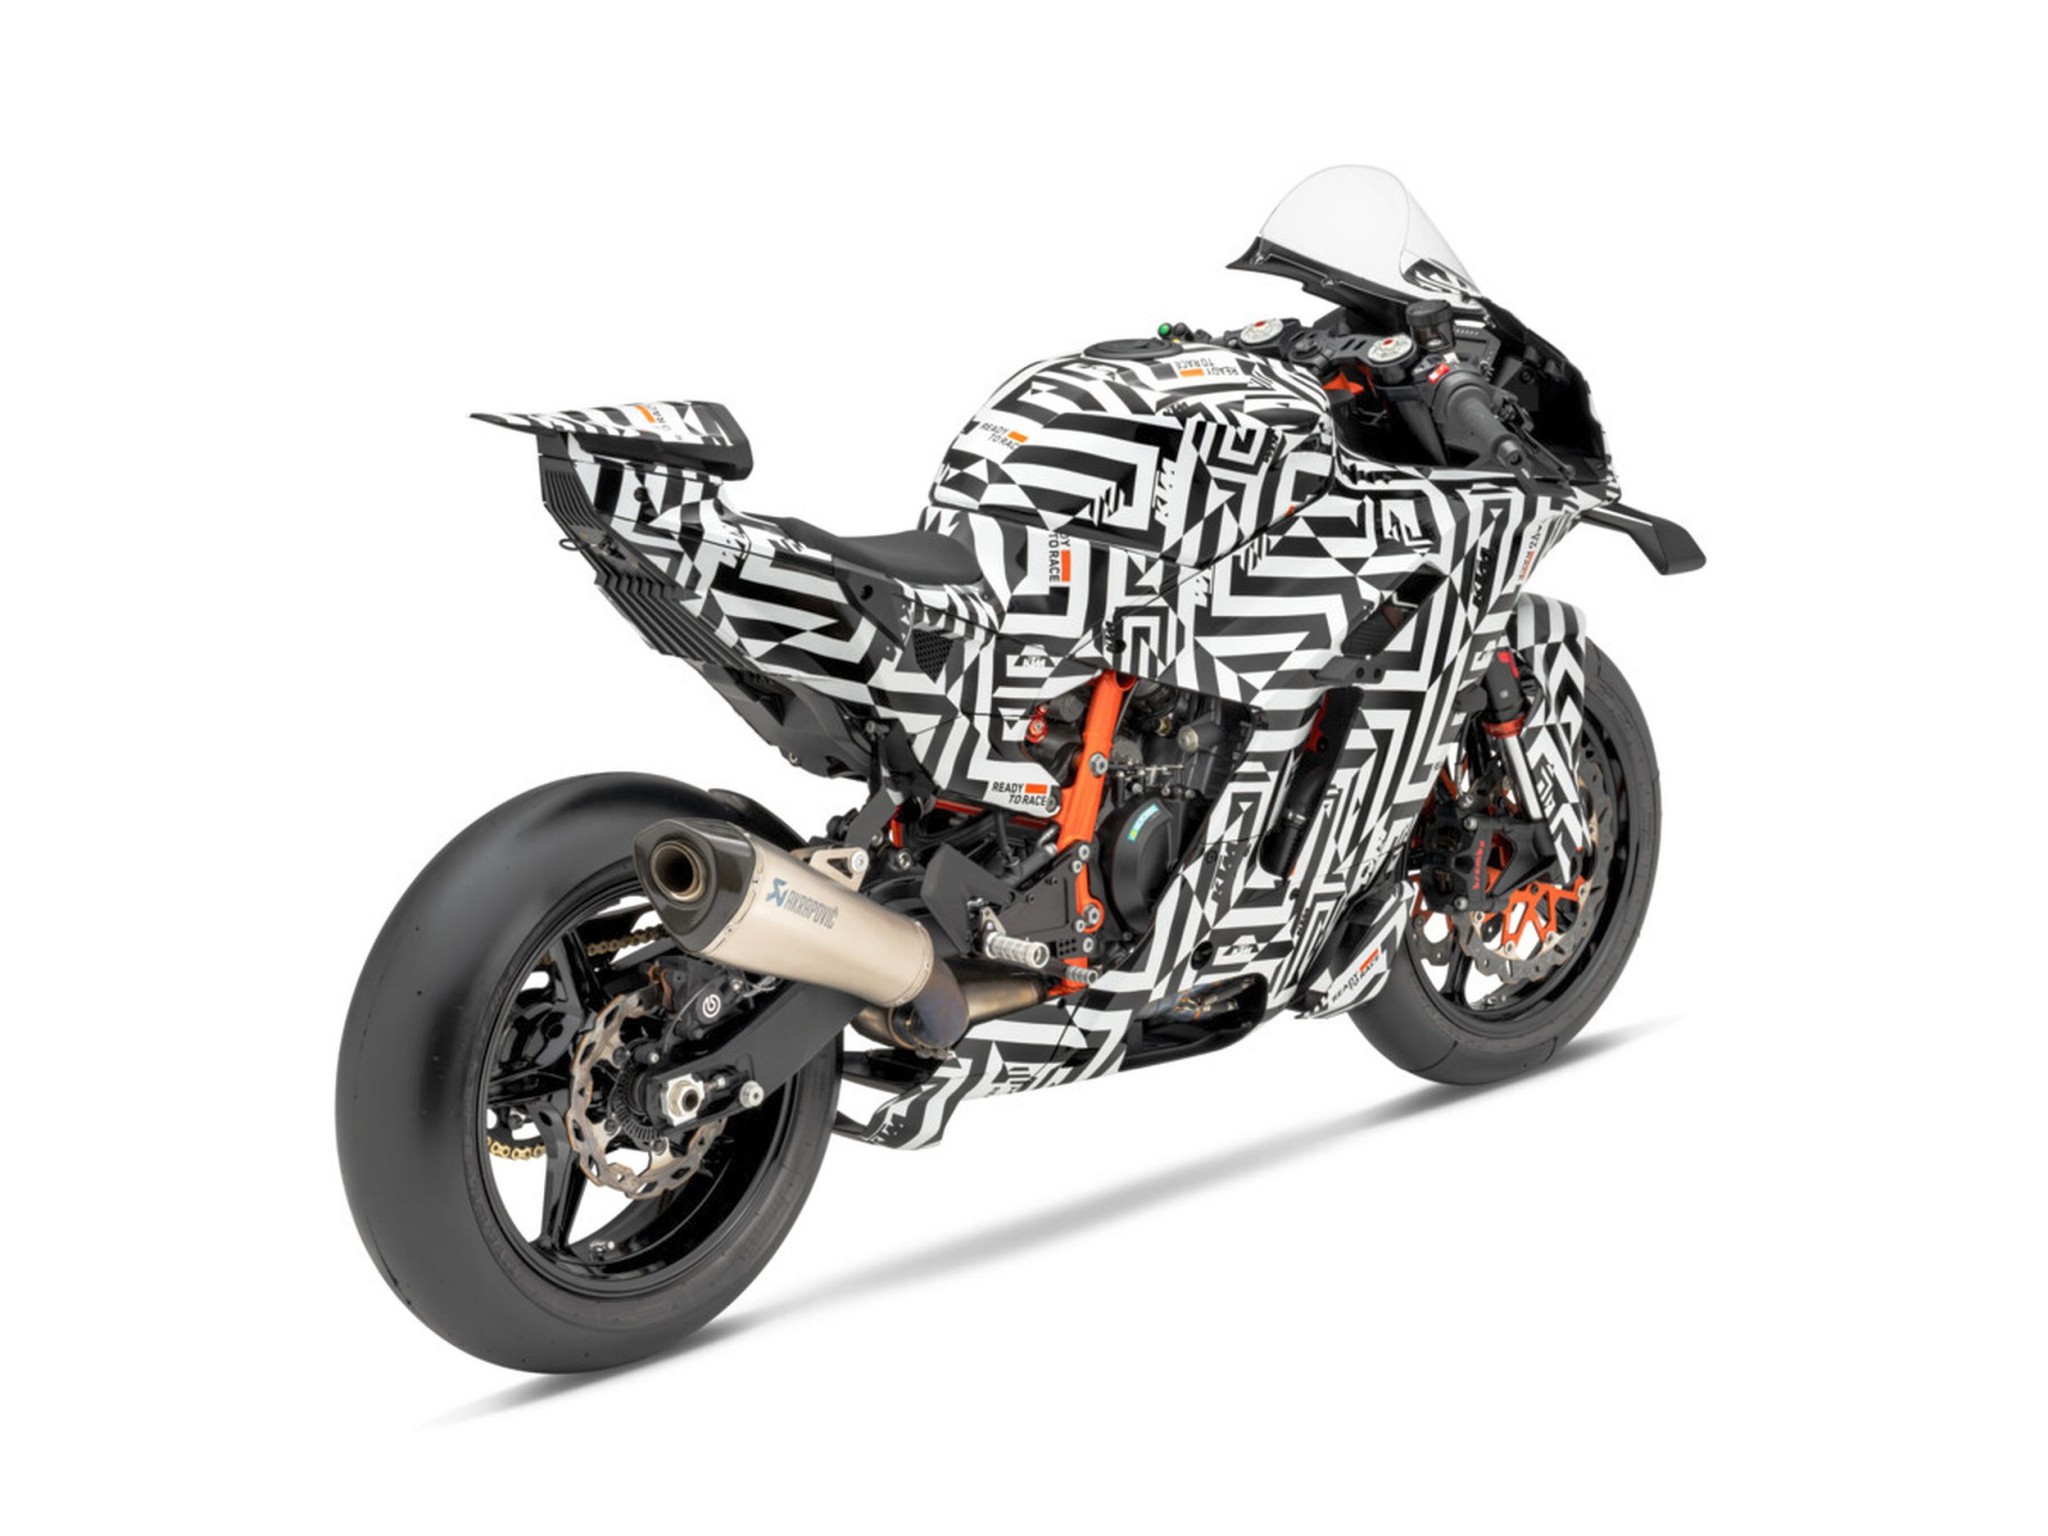 KTM 990 RC R - finally the thoroughbred sports bike for the road! - Image 49